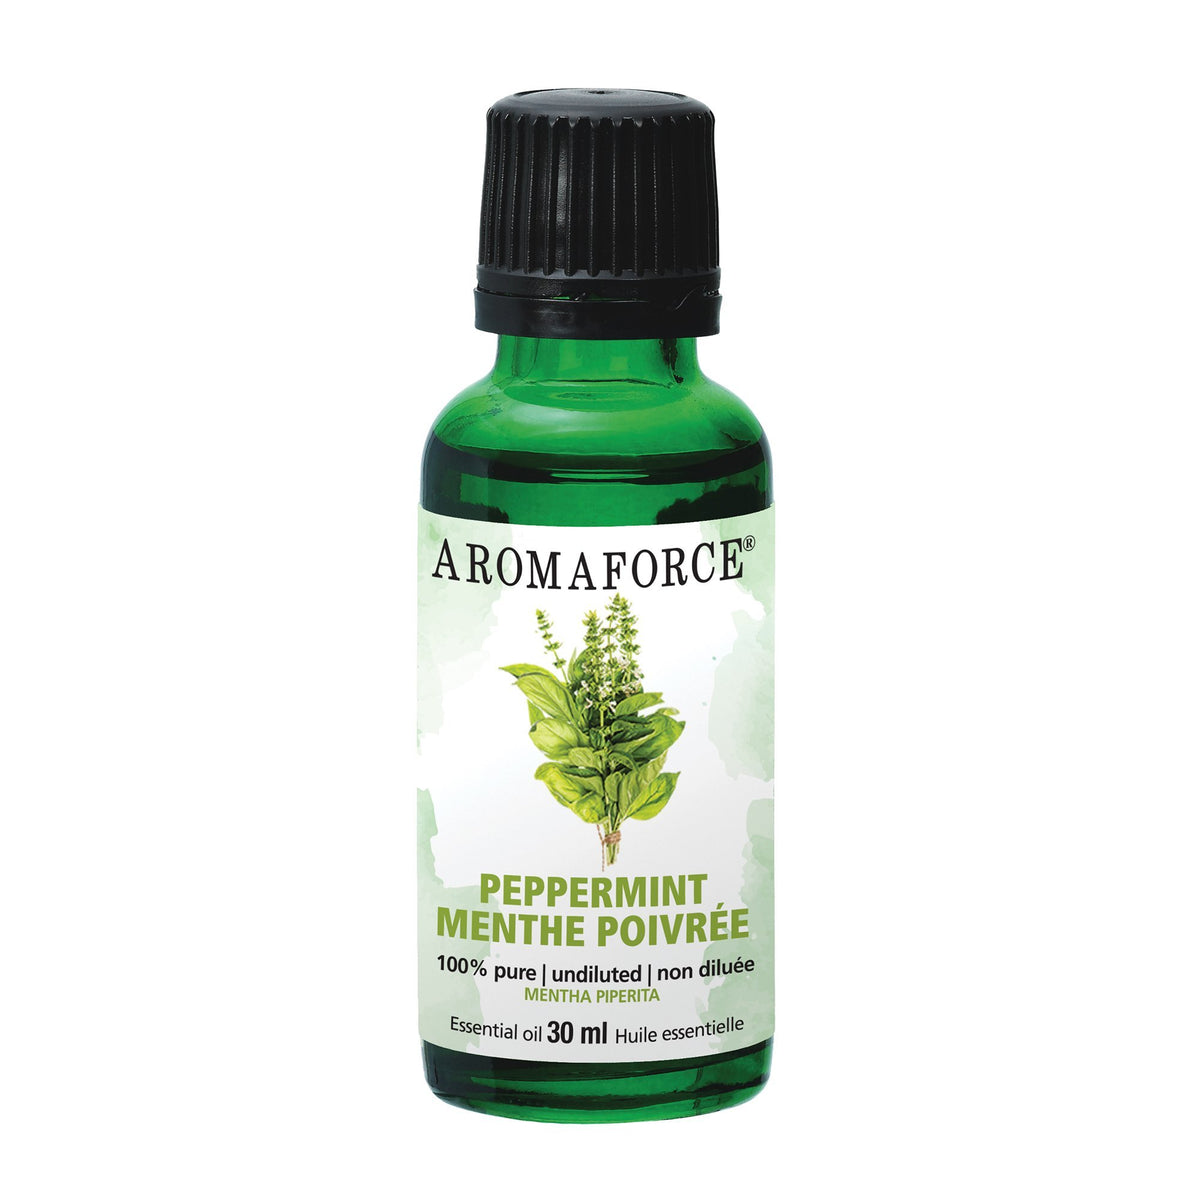 Aromaforce Peppermint Essential Oil 30mL - A.Vogel Canada